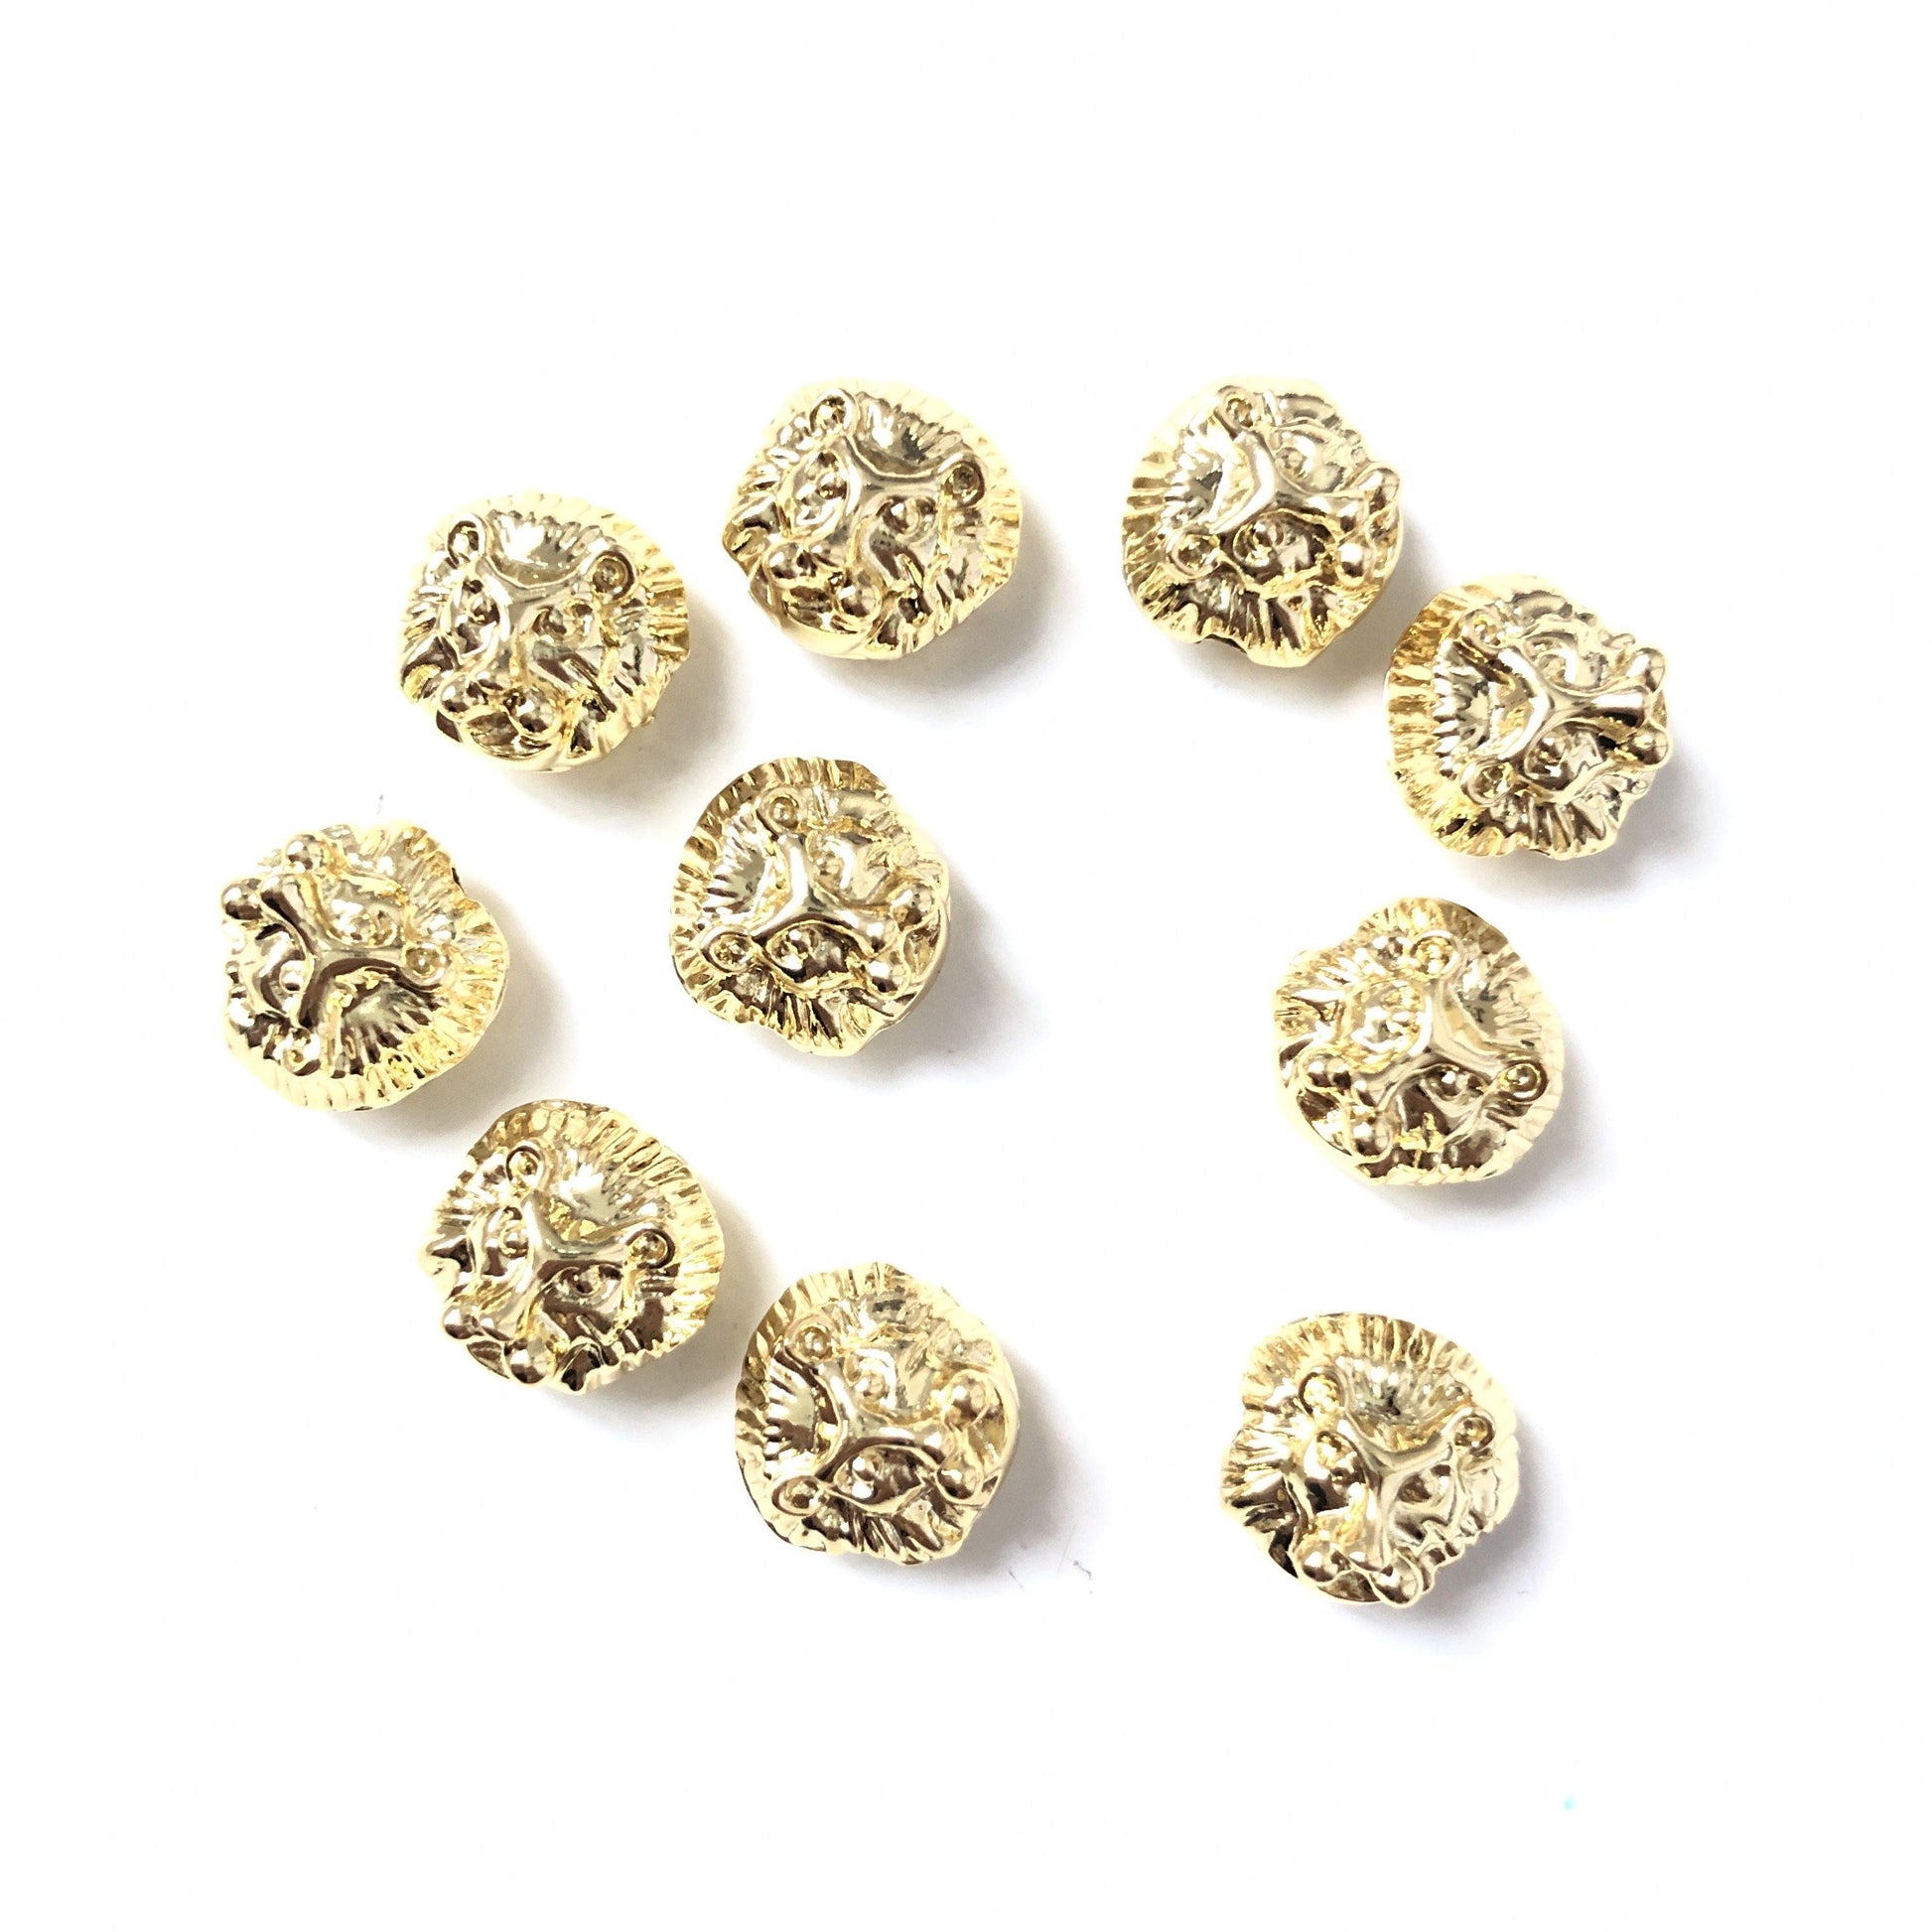 10-20pcs/lot Gold Plated Copper Lion Spacers Gold CZ Paved Spacers Animal Spacers Charms Beads Beyond